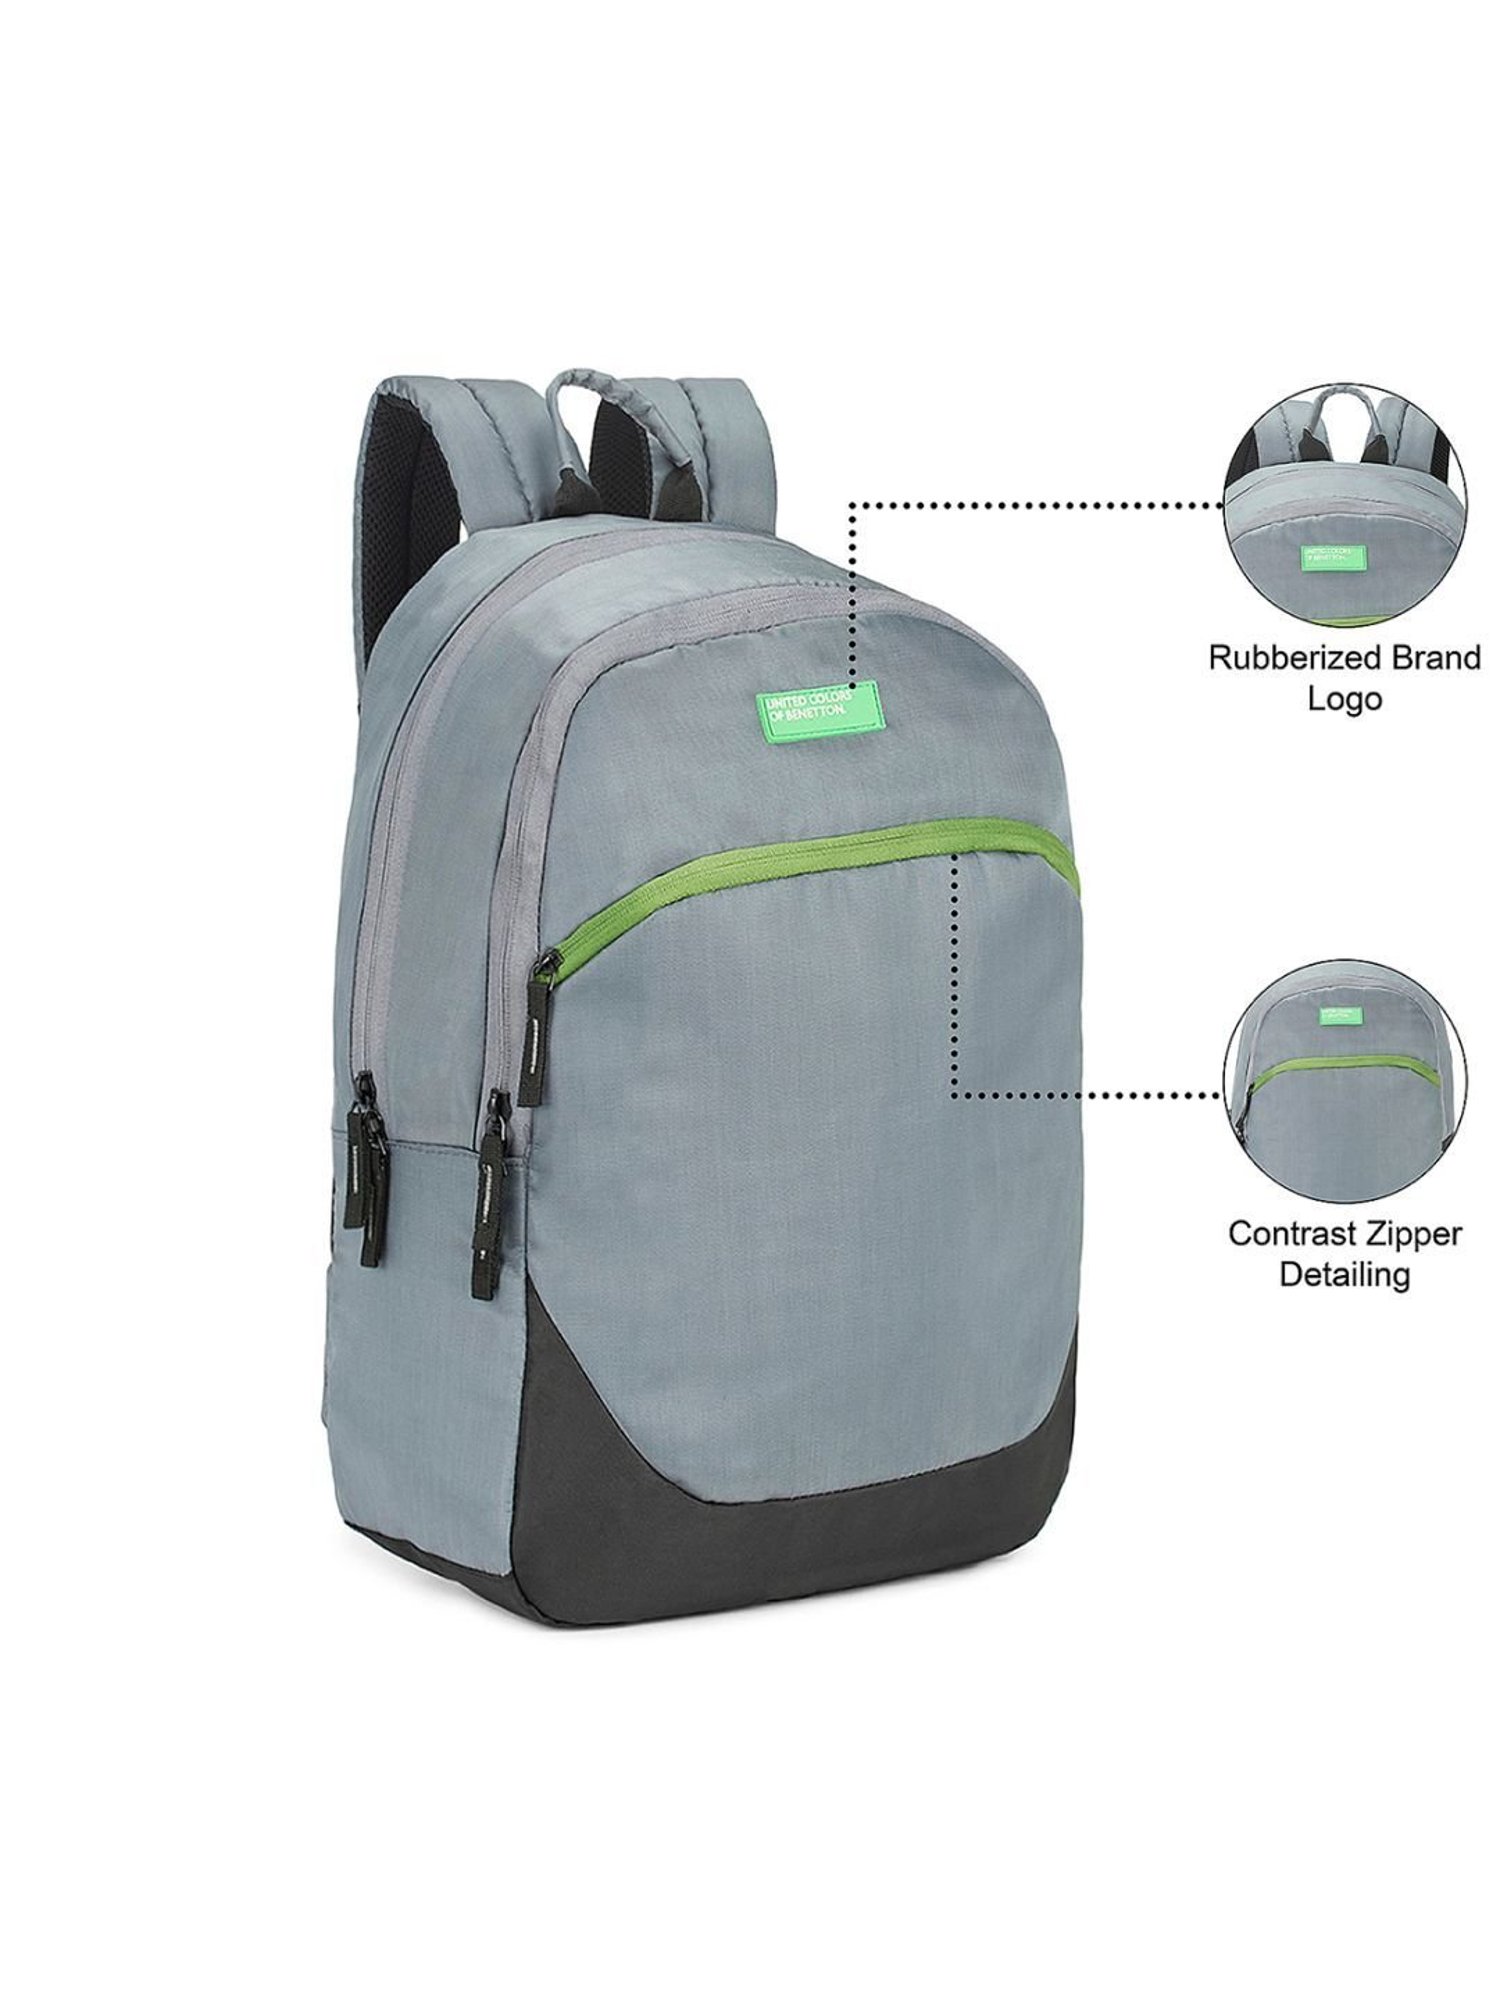 United Colors of Benetton COLLEGE BACKPACK 21.3 L Laptop Backpack 100 -  Price in India | Flipkart.com